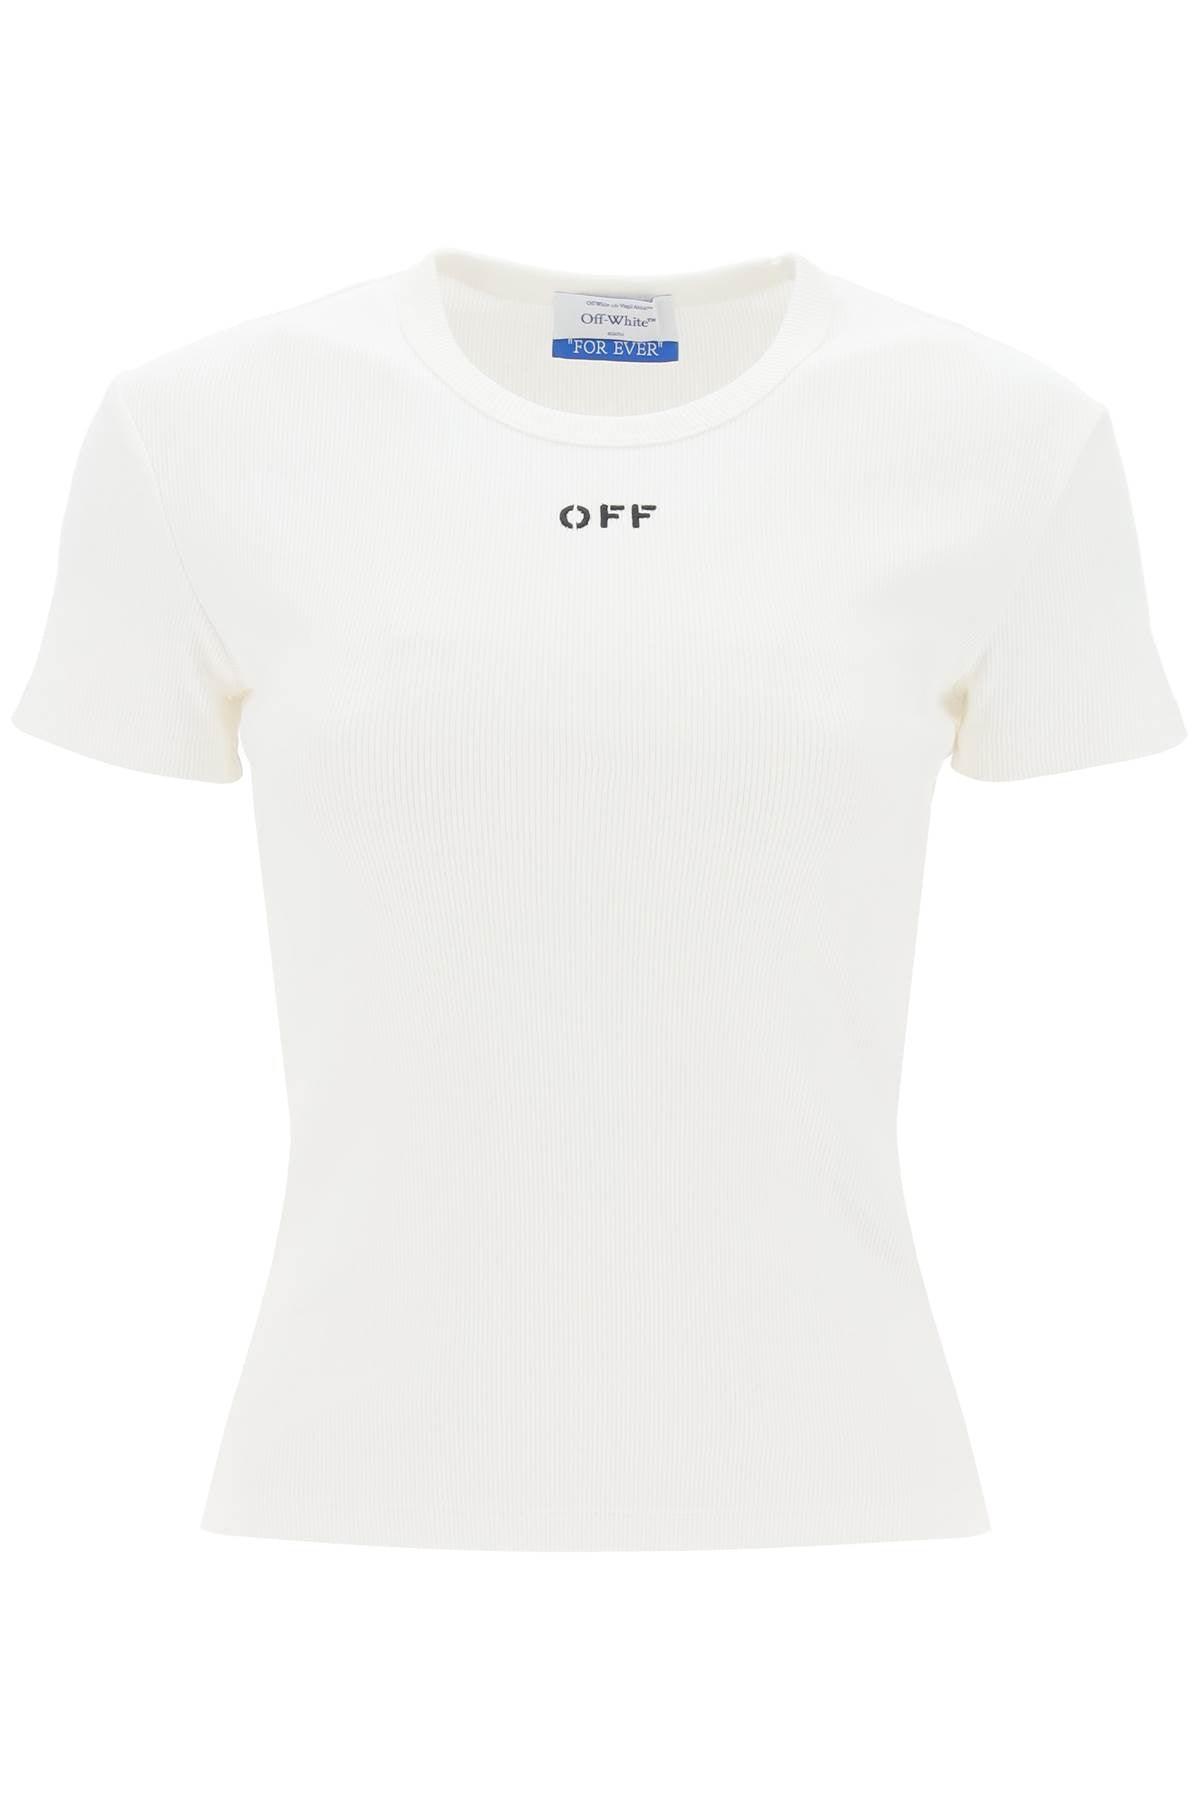 Off White Ribbed T Shirt With Off Embroidery - JOHN JULIA